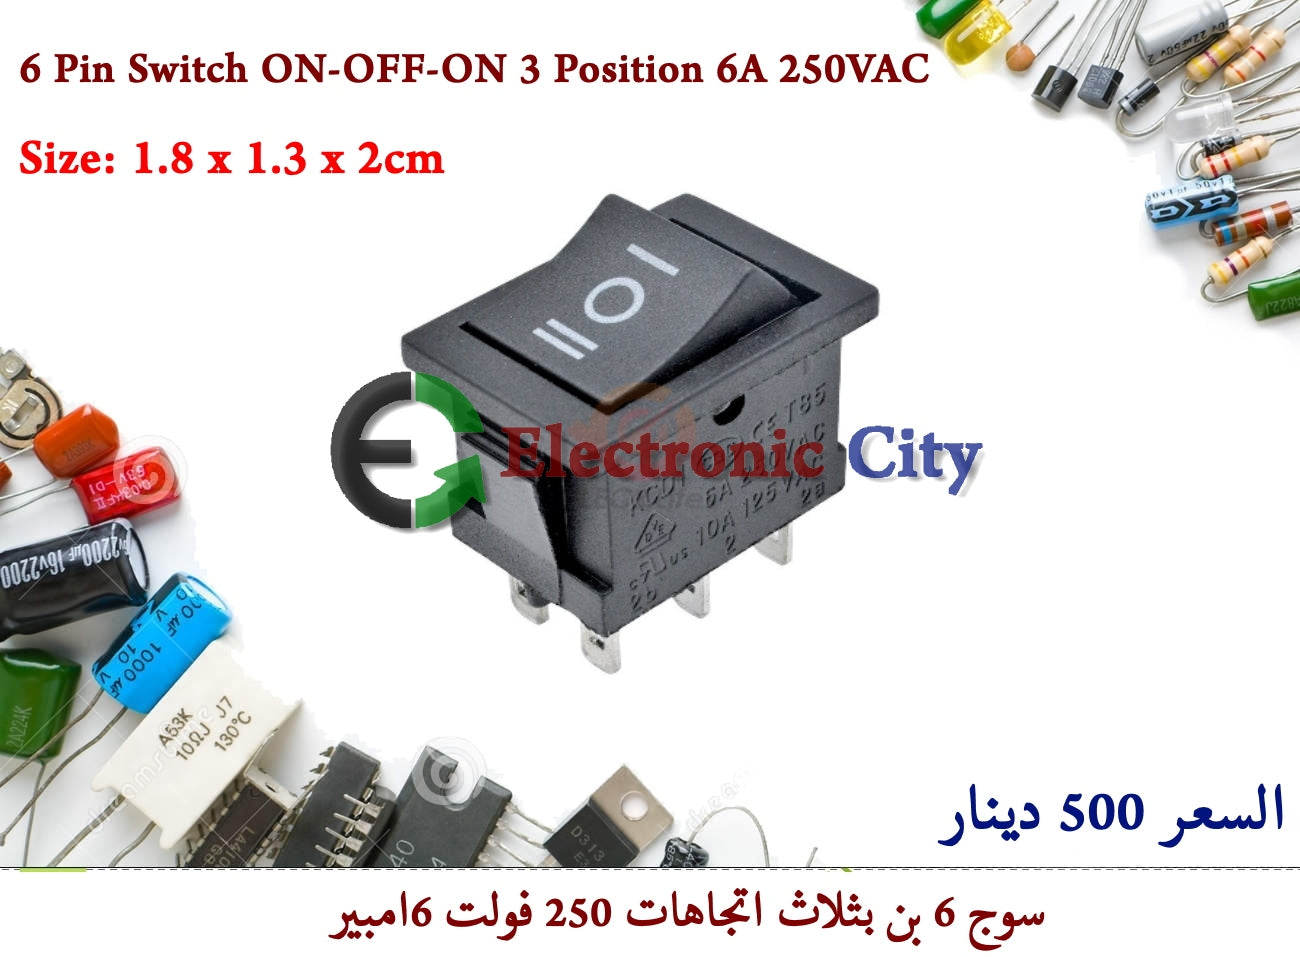 6 Pin Switch ON-OFF-ON 3 Position 6A 250VAC Size 1.8 x 1.3 x 2cm 0504975